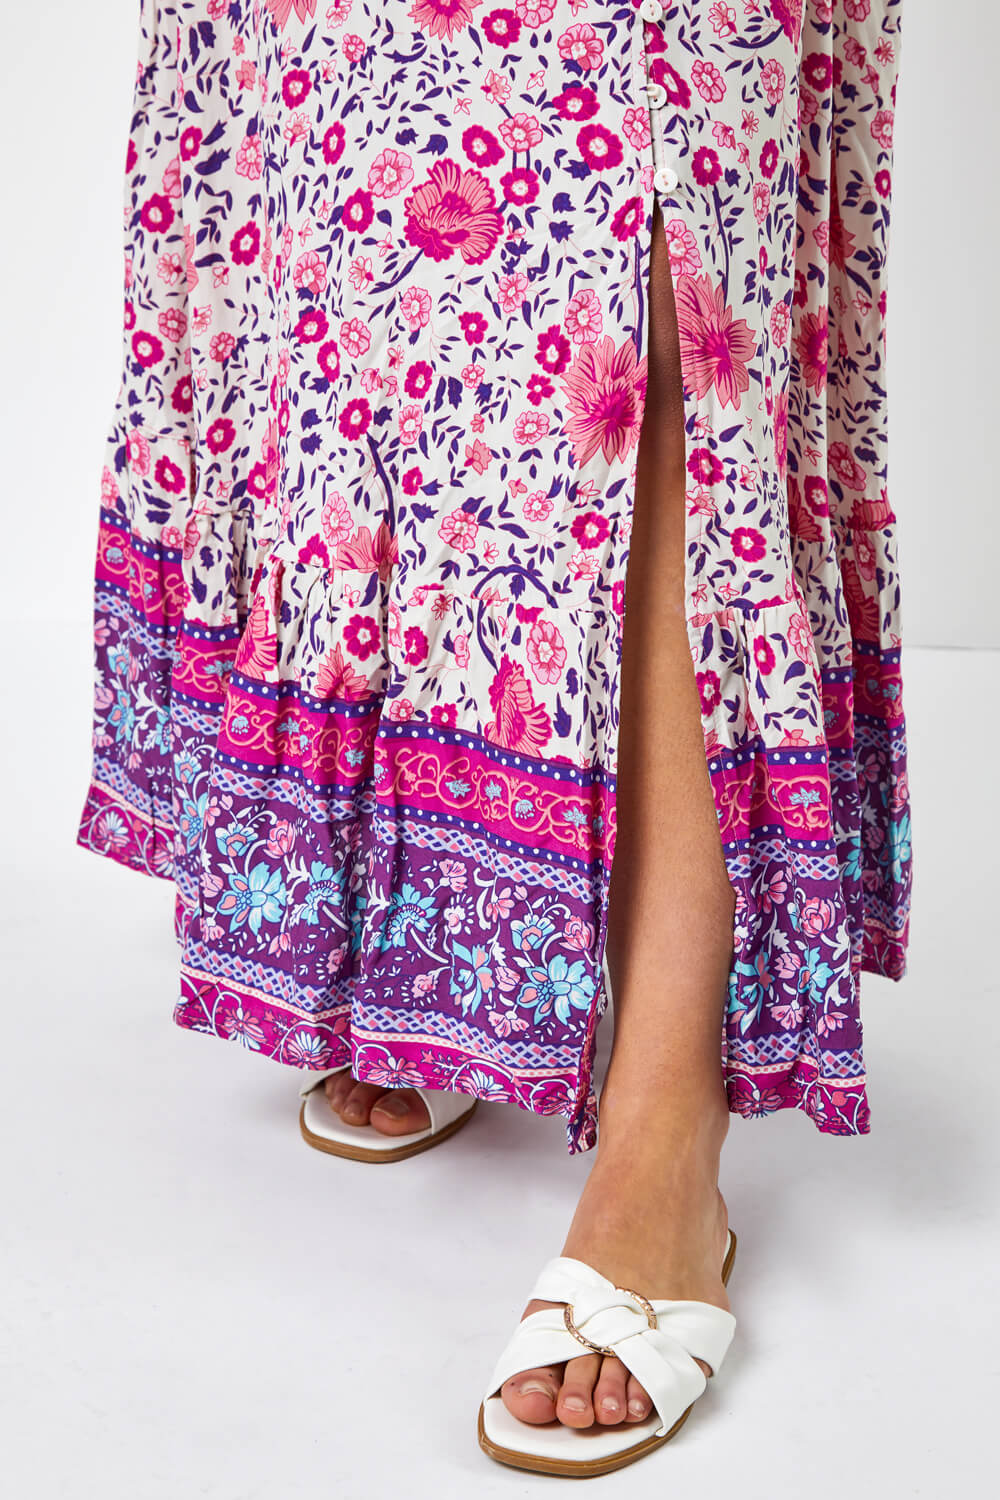 PINK Floral Shirred Waist Maxi Dress, Image 5 of 5